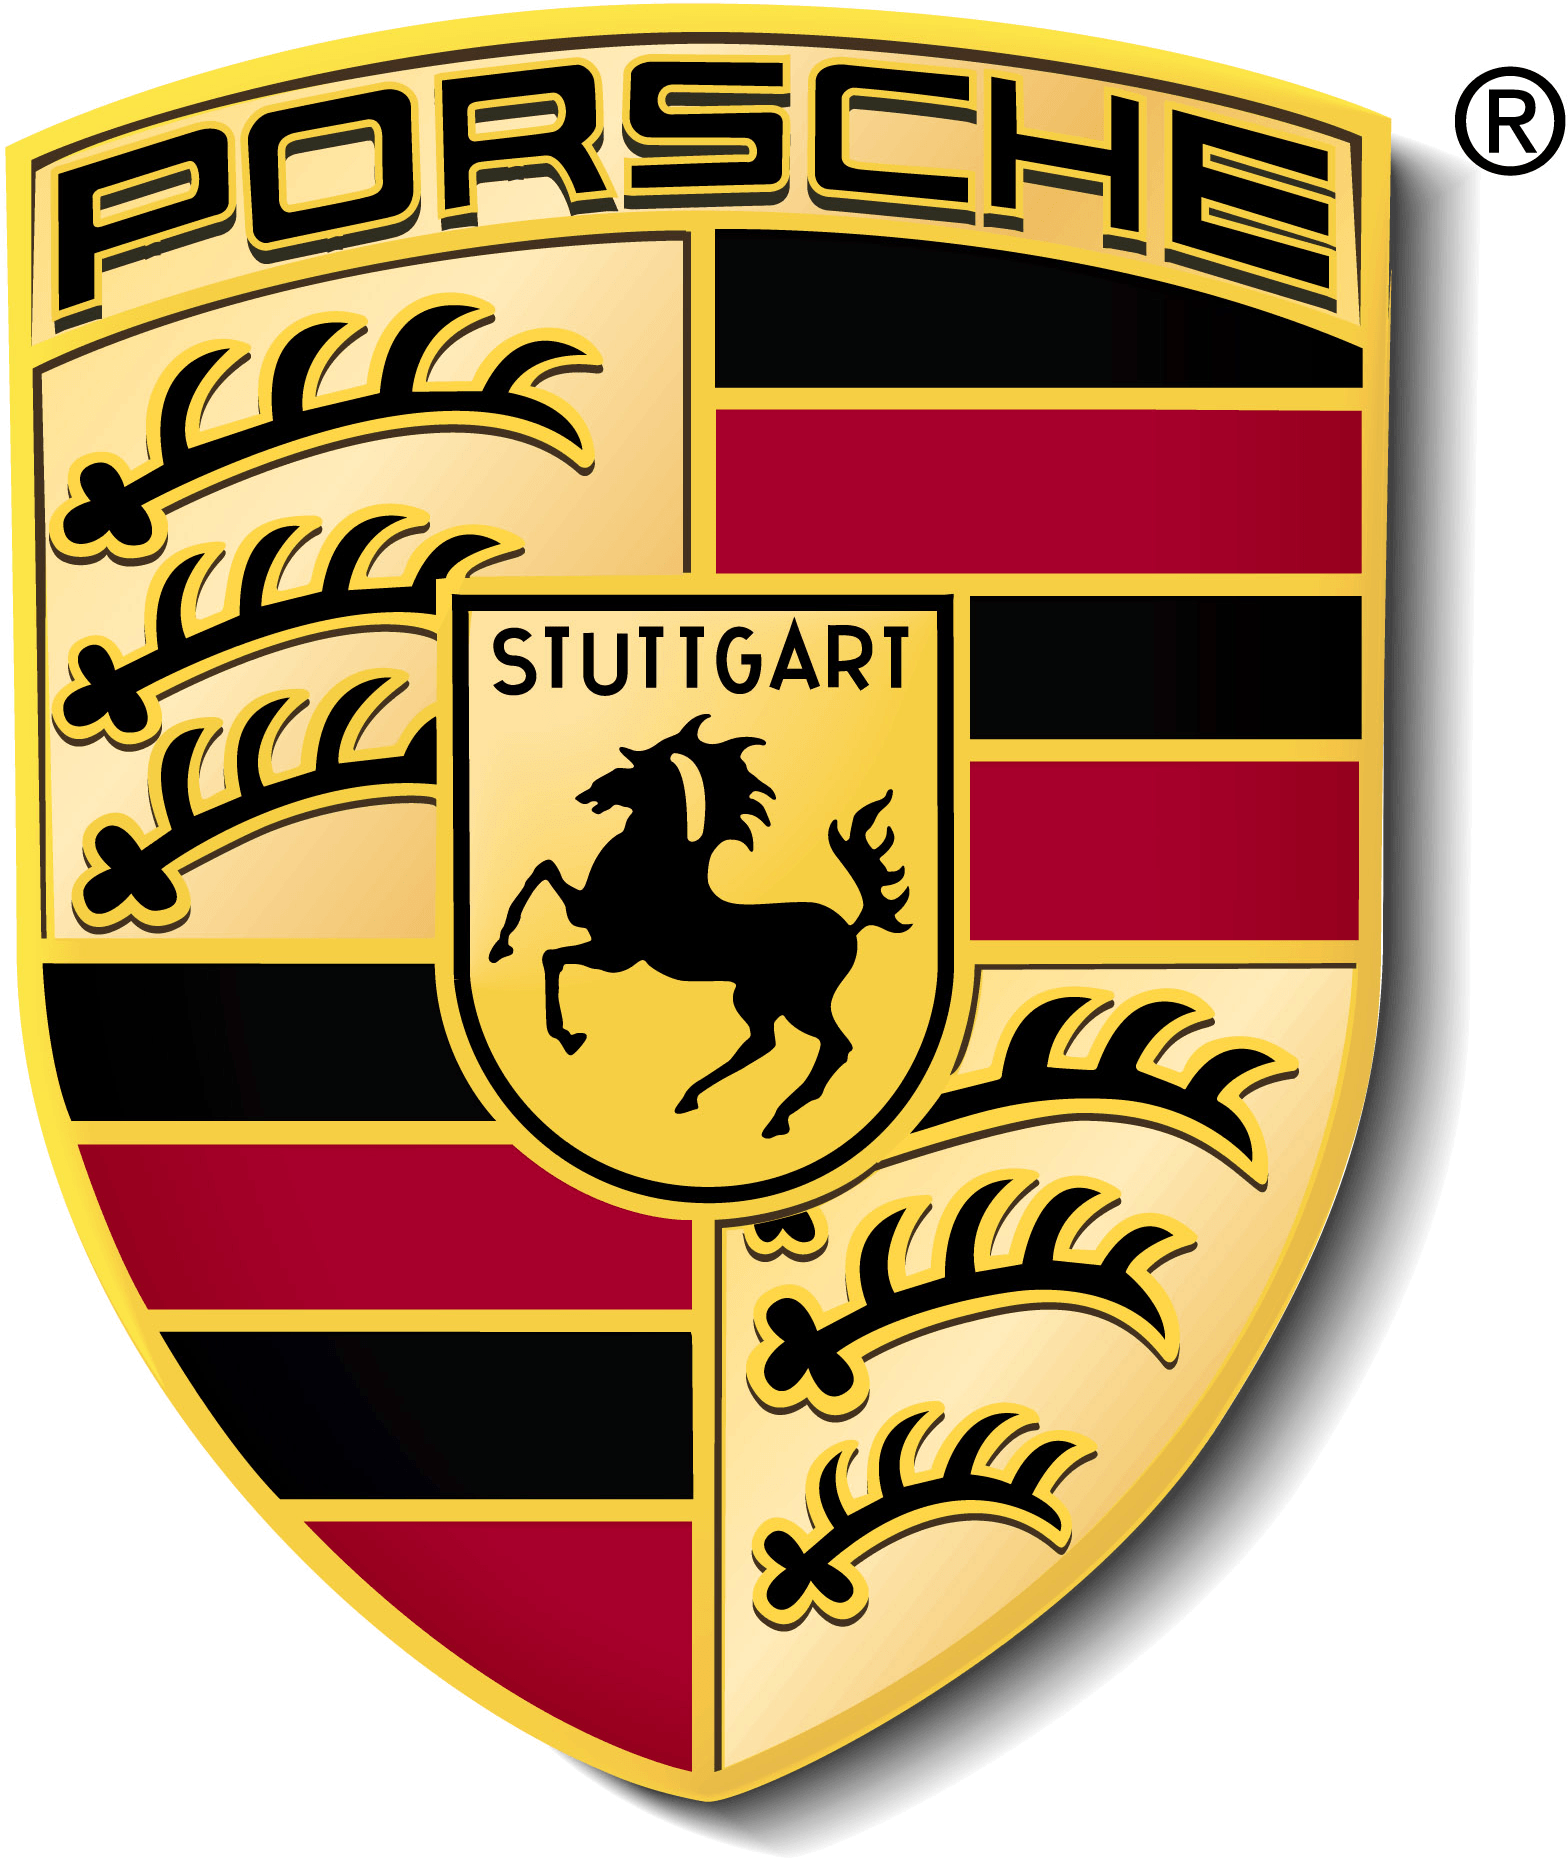 German Luxury Car Logo - German flag colors (Company is based out of Germany) and shield type